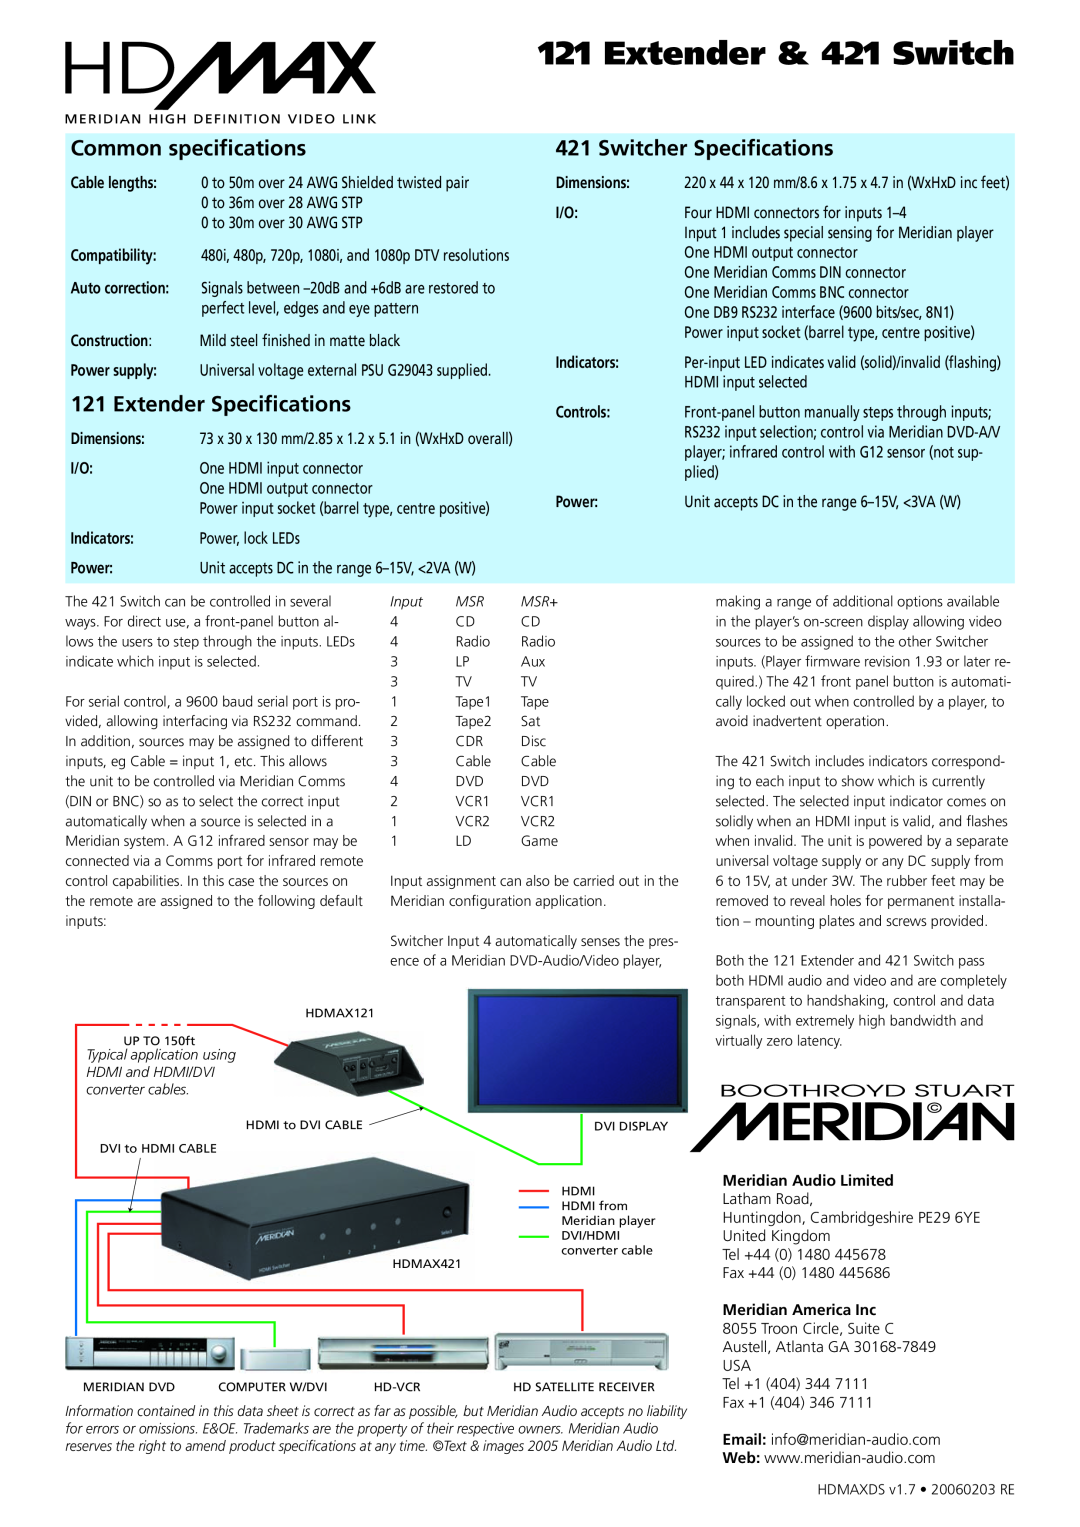 Meridian Audio Common specifications, Extender Specifications, Switcher Specifications, Input, Msr+, HDMI and HDMI/DVI 